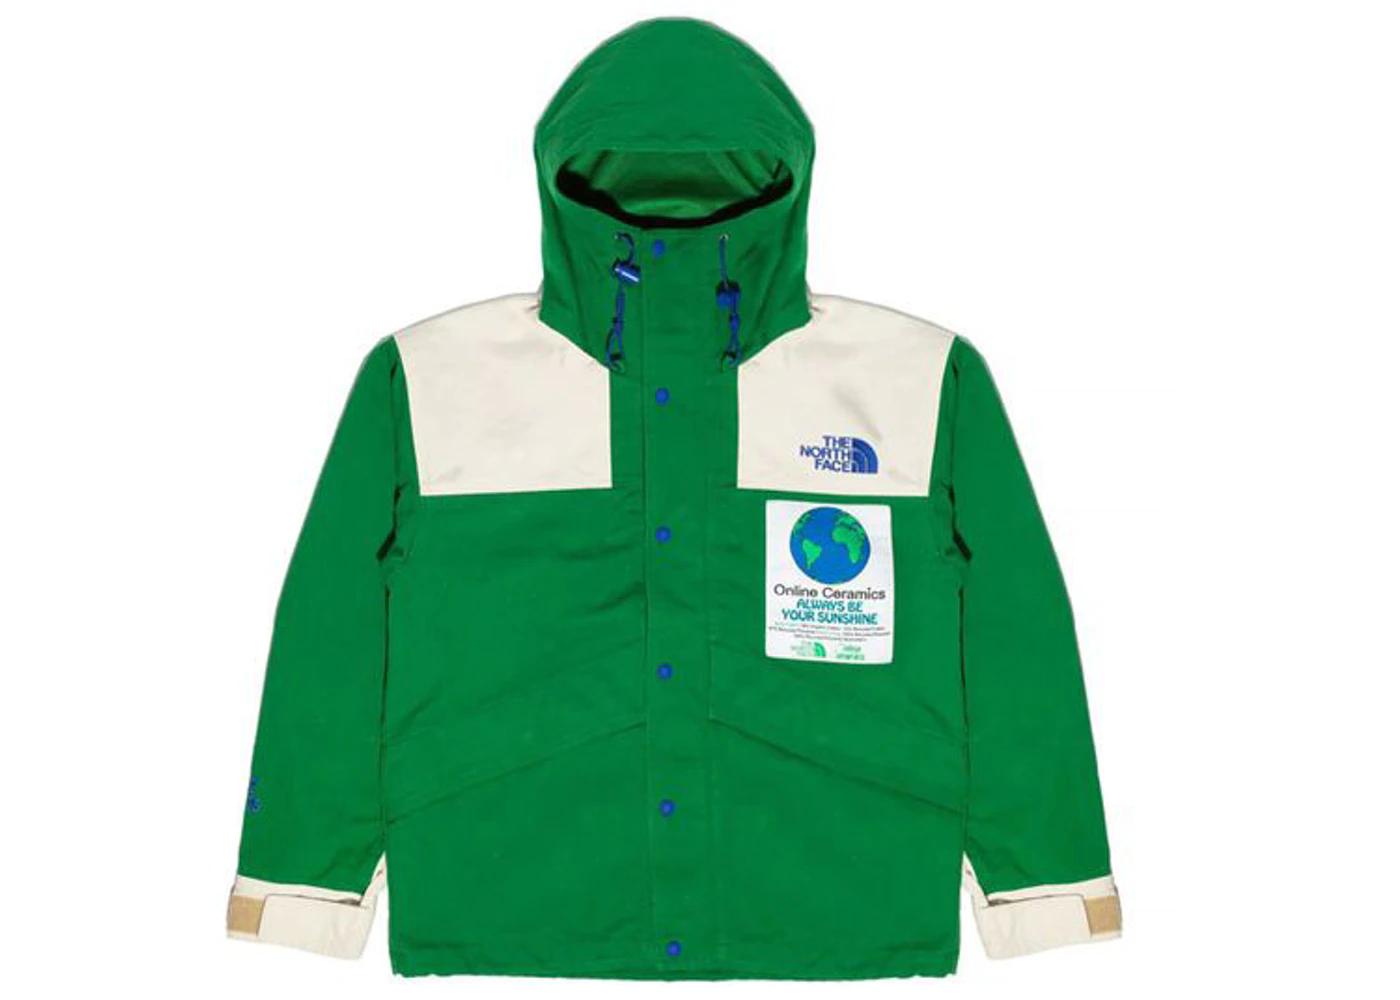 The North Face x Online Ceramics 86 Mountain Jacket Green by THE NORTH FACE